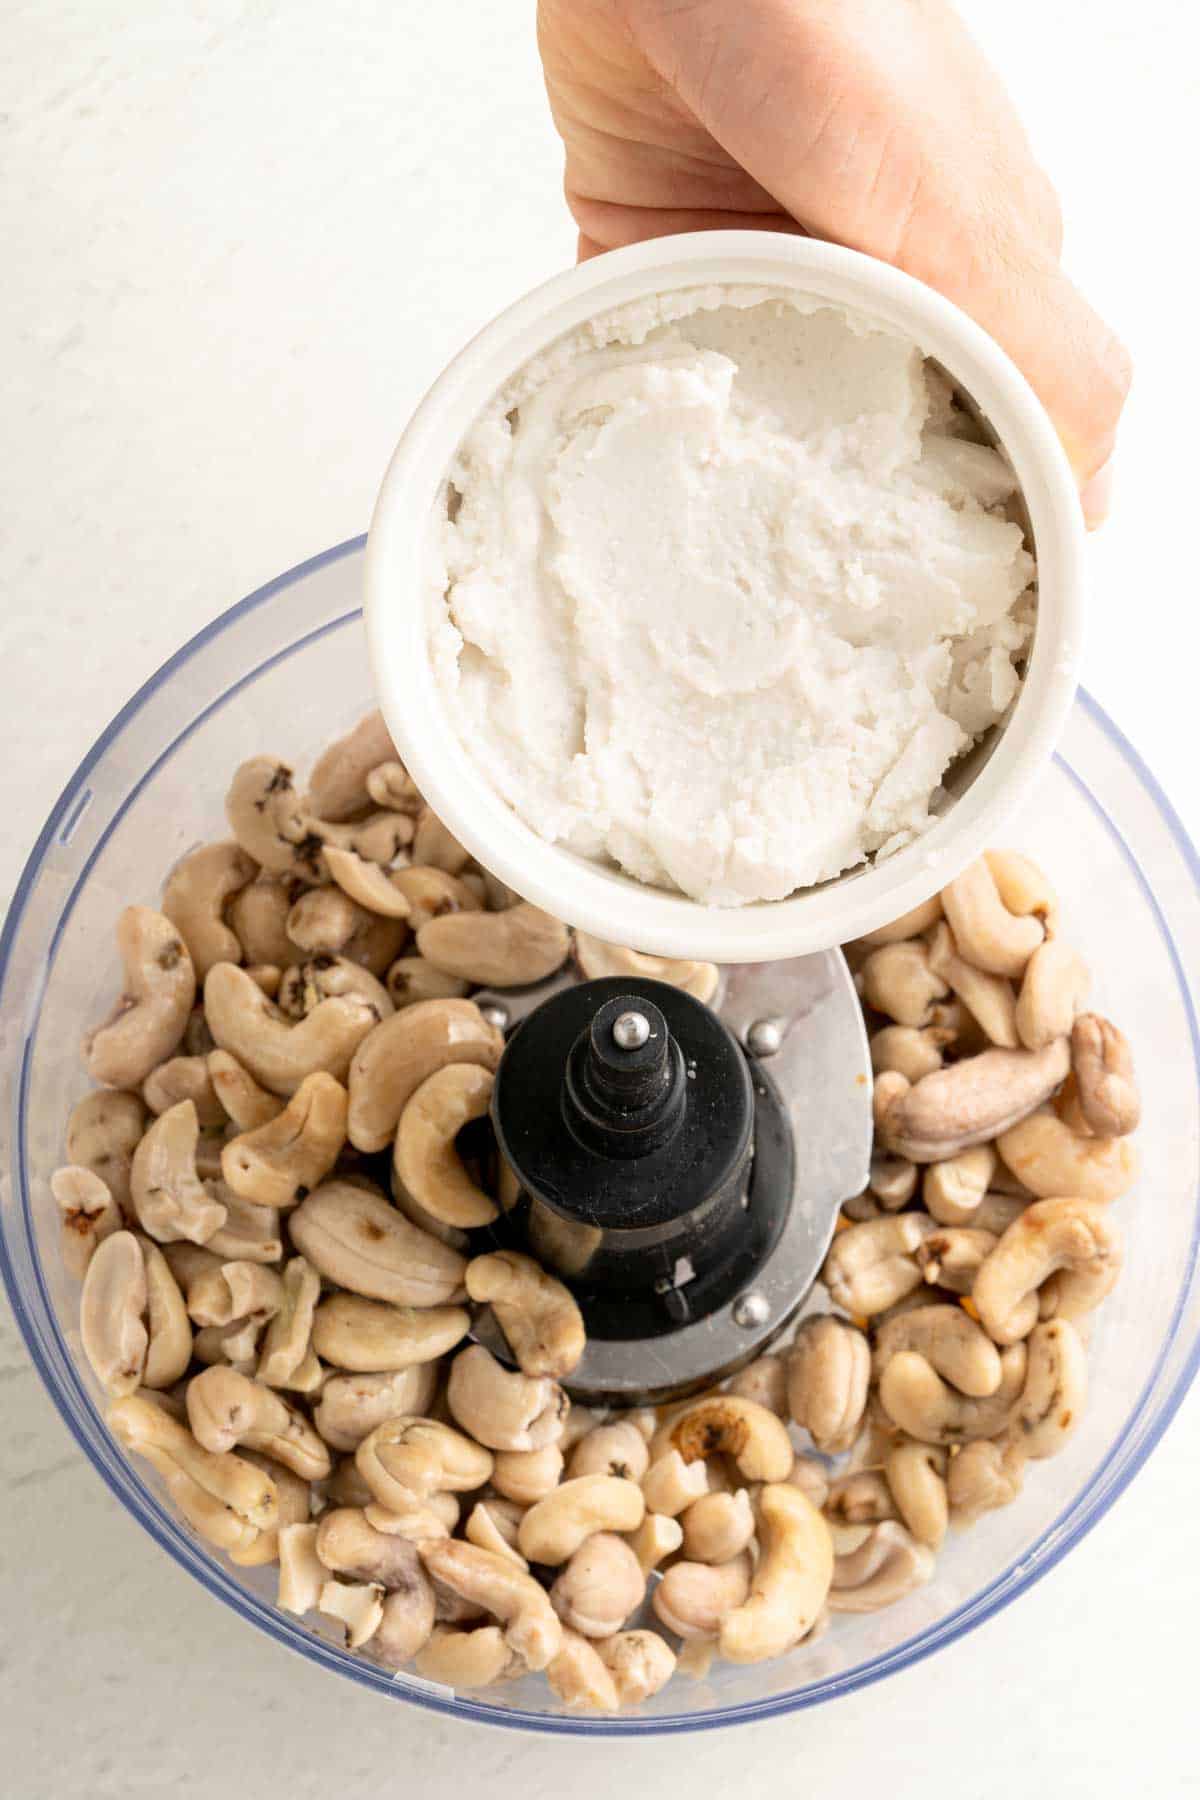 Pouring coconut milk into a in a food processor with cashews.